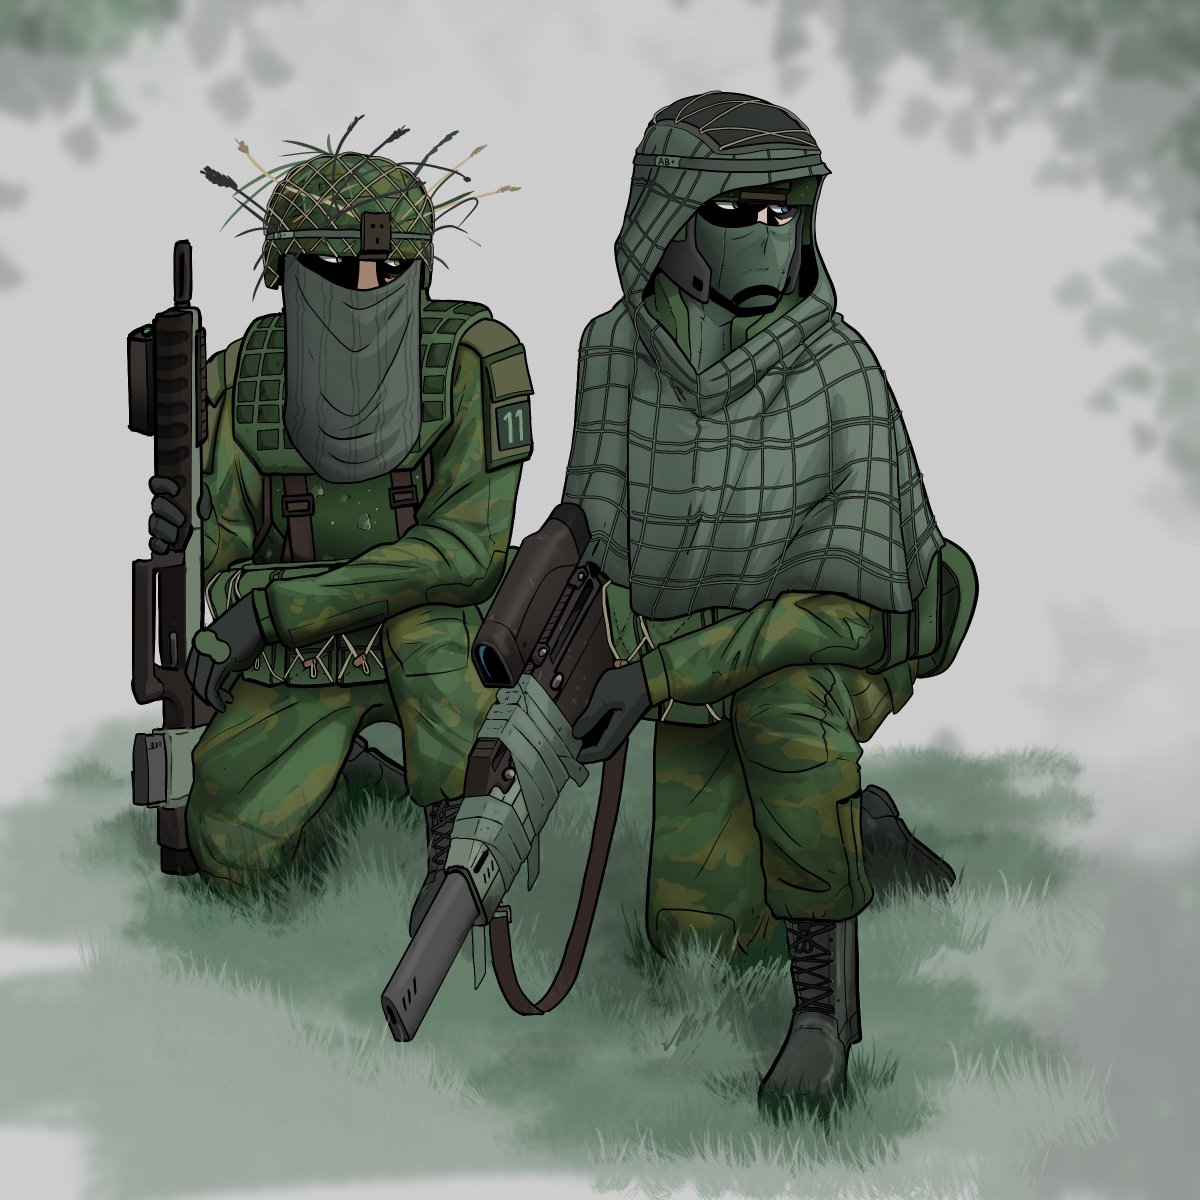 CSCN marksman team in the standard woodland fatigues.

Simple doodle